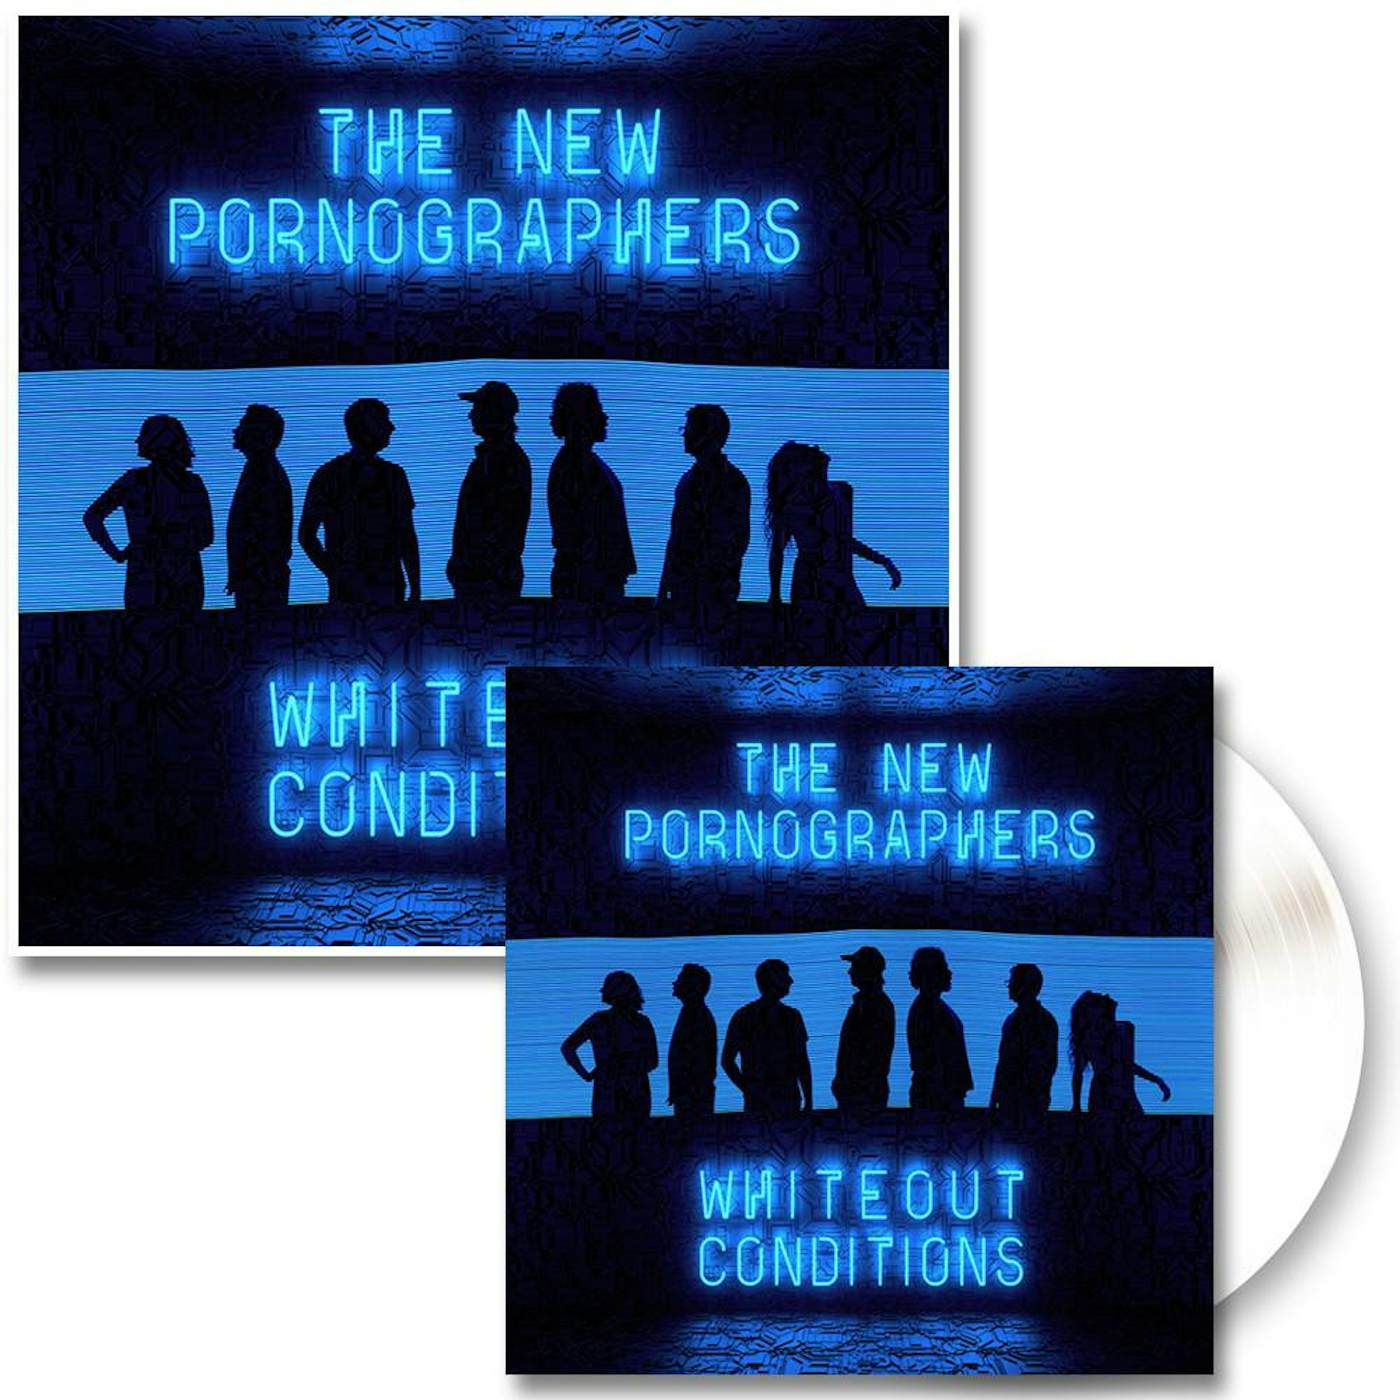 The New Pornographers Whiteout Conditions LP (White) & Glow In The Dark Poster